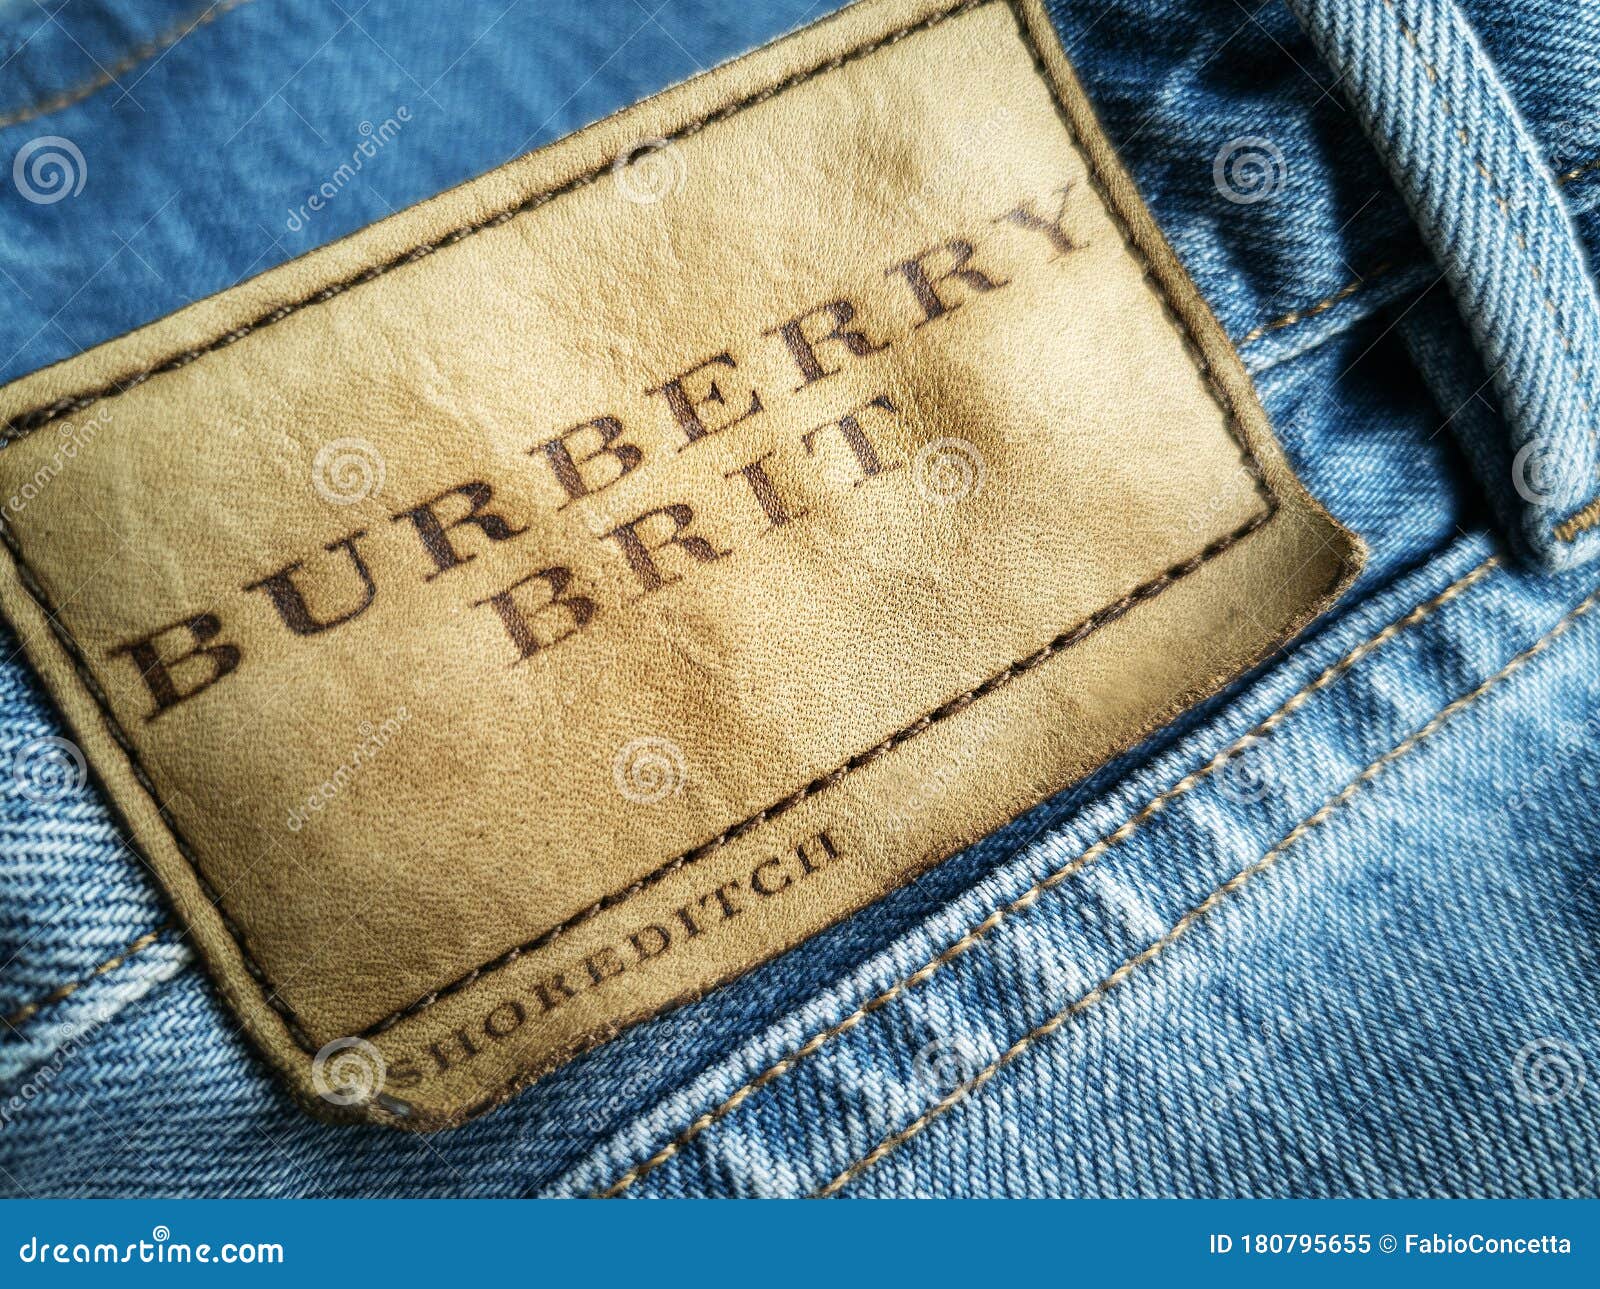 Brand Background Nameplate Burberry Jeans Editorial Image - Image of ...